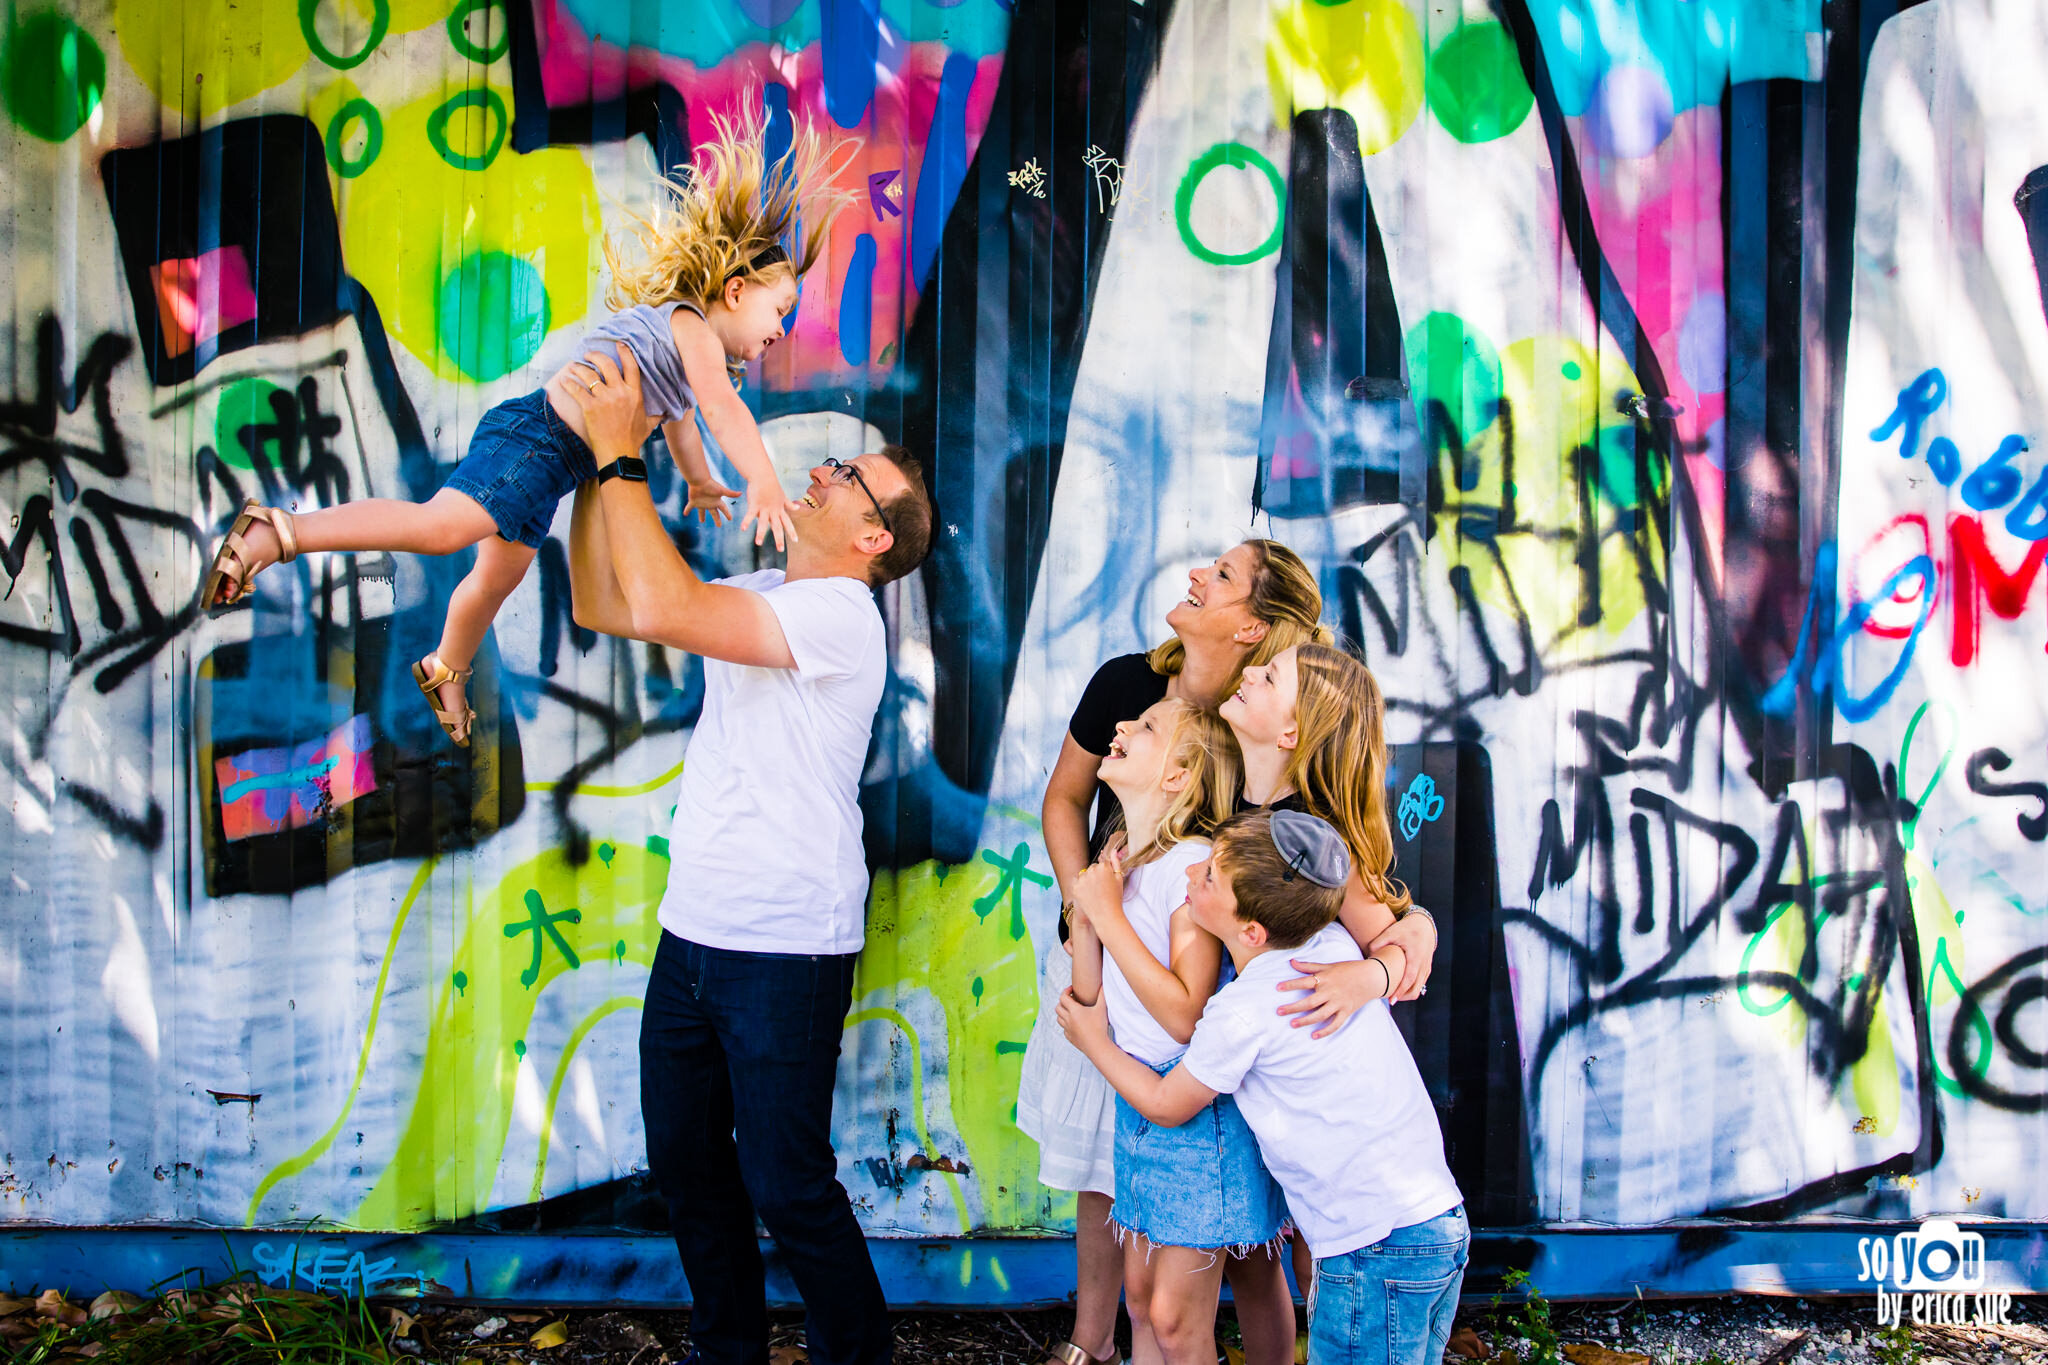 18-so-you-by-erica-sue-extended-family-session-wynwood-lifestyle-photographer-CD8A7738.jpg